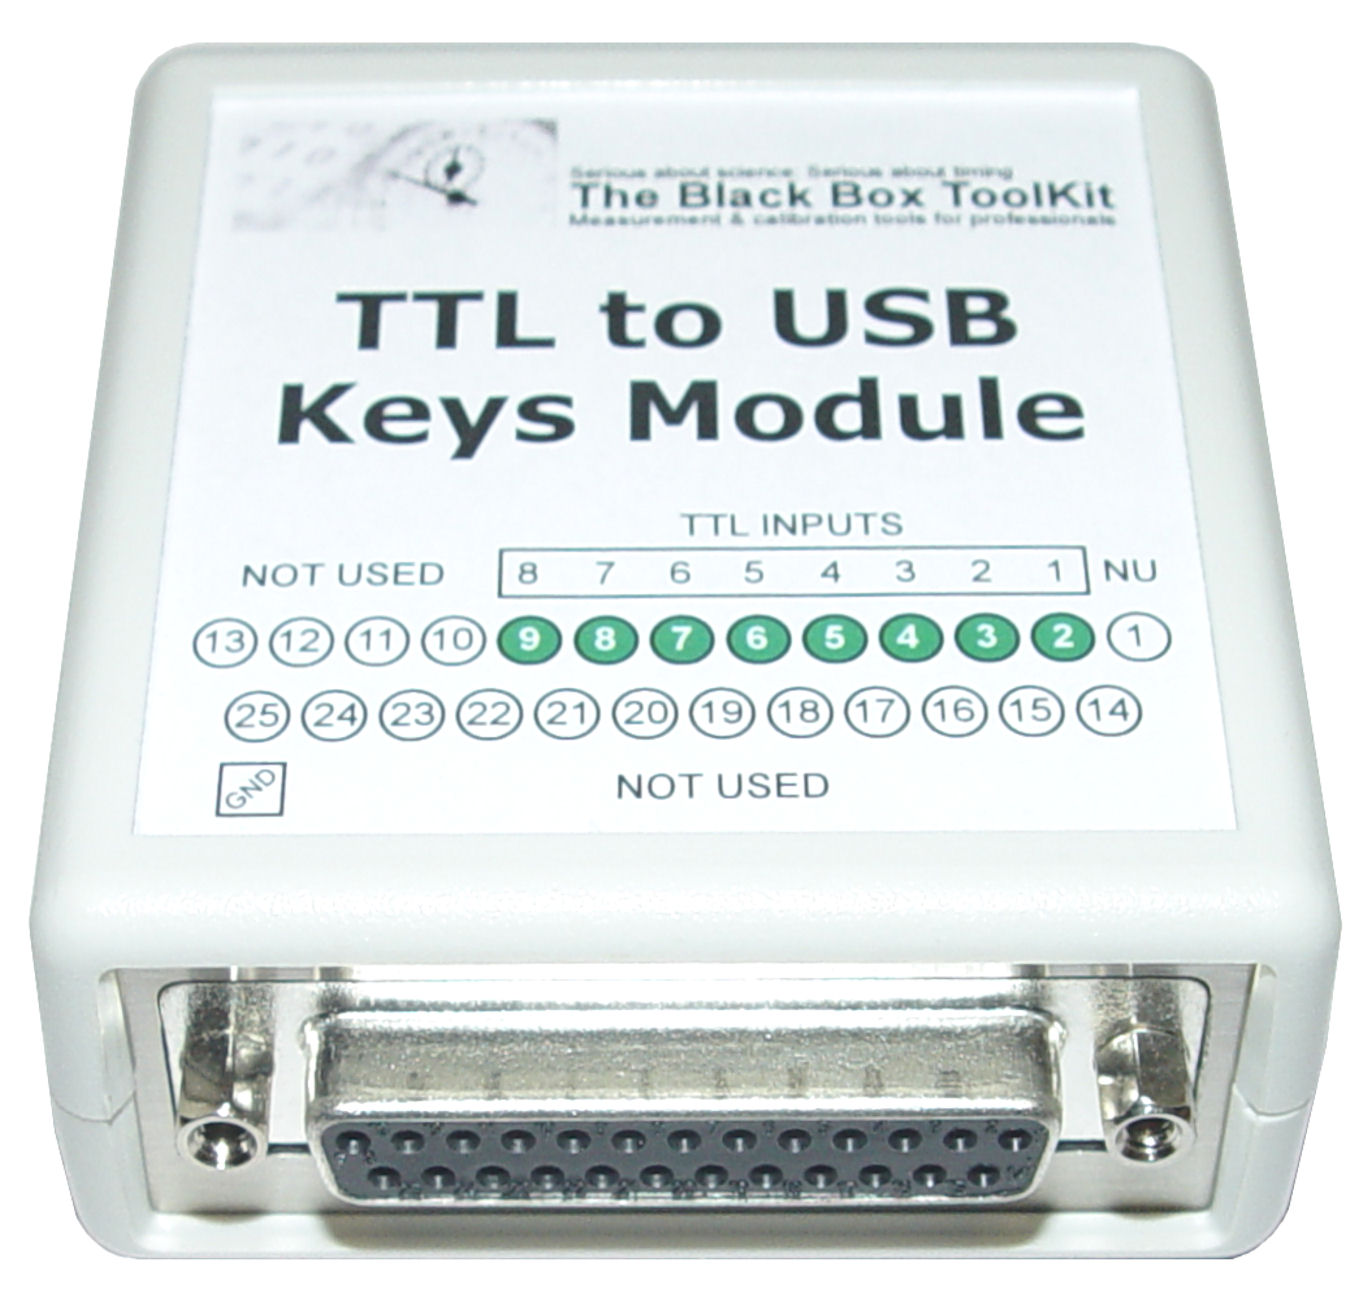 The Black Box ToolKit TTL to USB Keys Module enables you to quickly and easily create USB HID keyboard events from TTL signals as an input to any Experiment Generator or any other software that accepts standard USB keyboard inputs. It can be used in any environments where there is a need to create USB keyboard key presses from up to 10 TTL inputs, e.g. EEG, eye tracking etc. Works on any platform (Windows, MacOS, Linux etc).